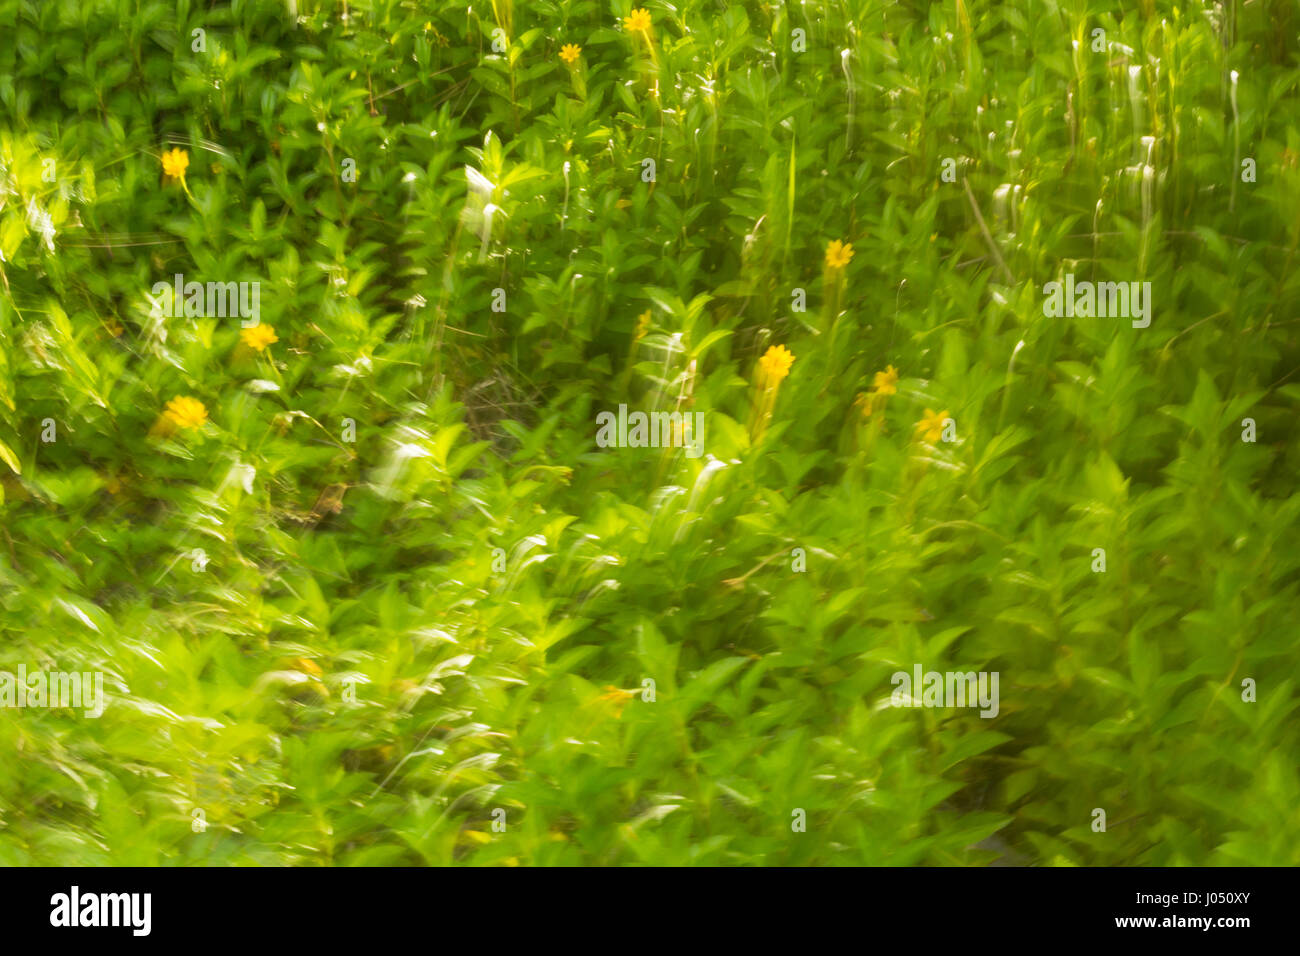 Intentional camera movement of plant leaves. Stock Photo